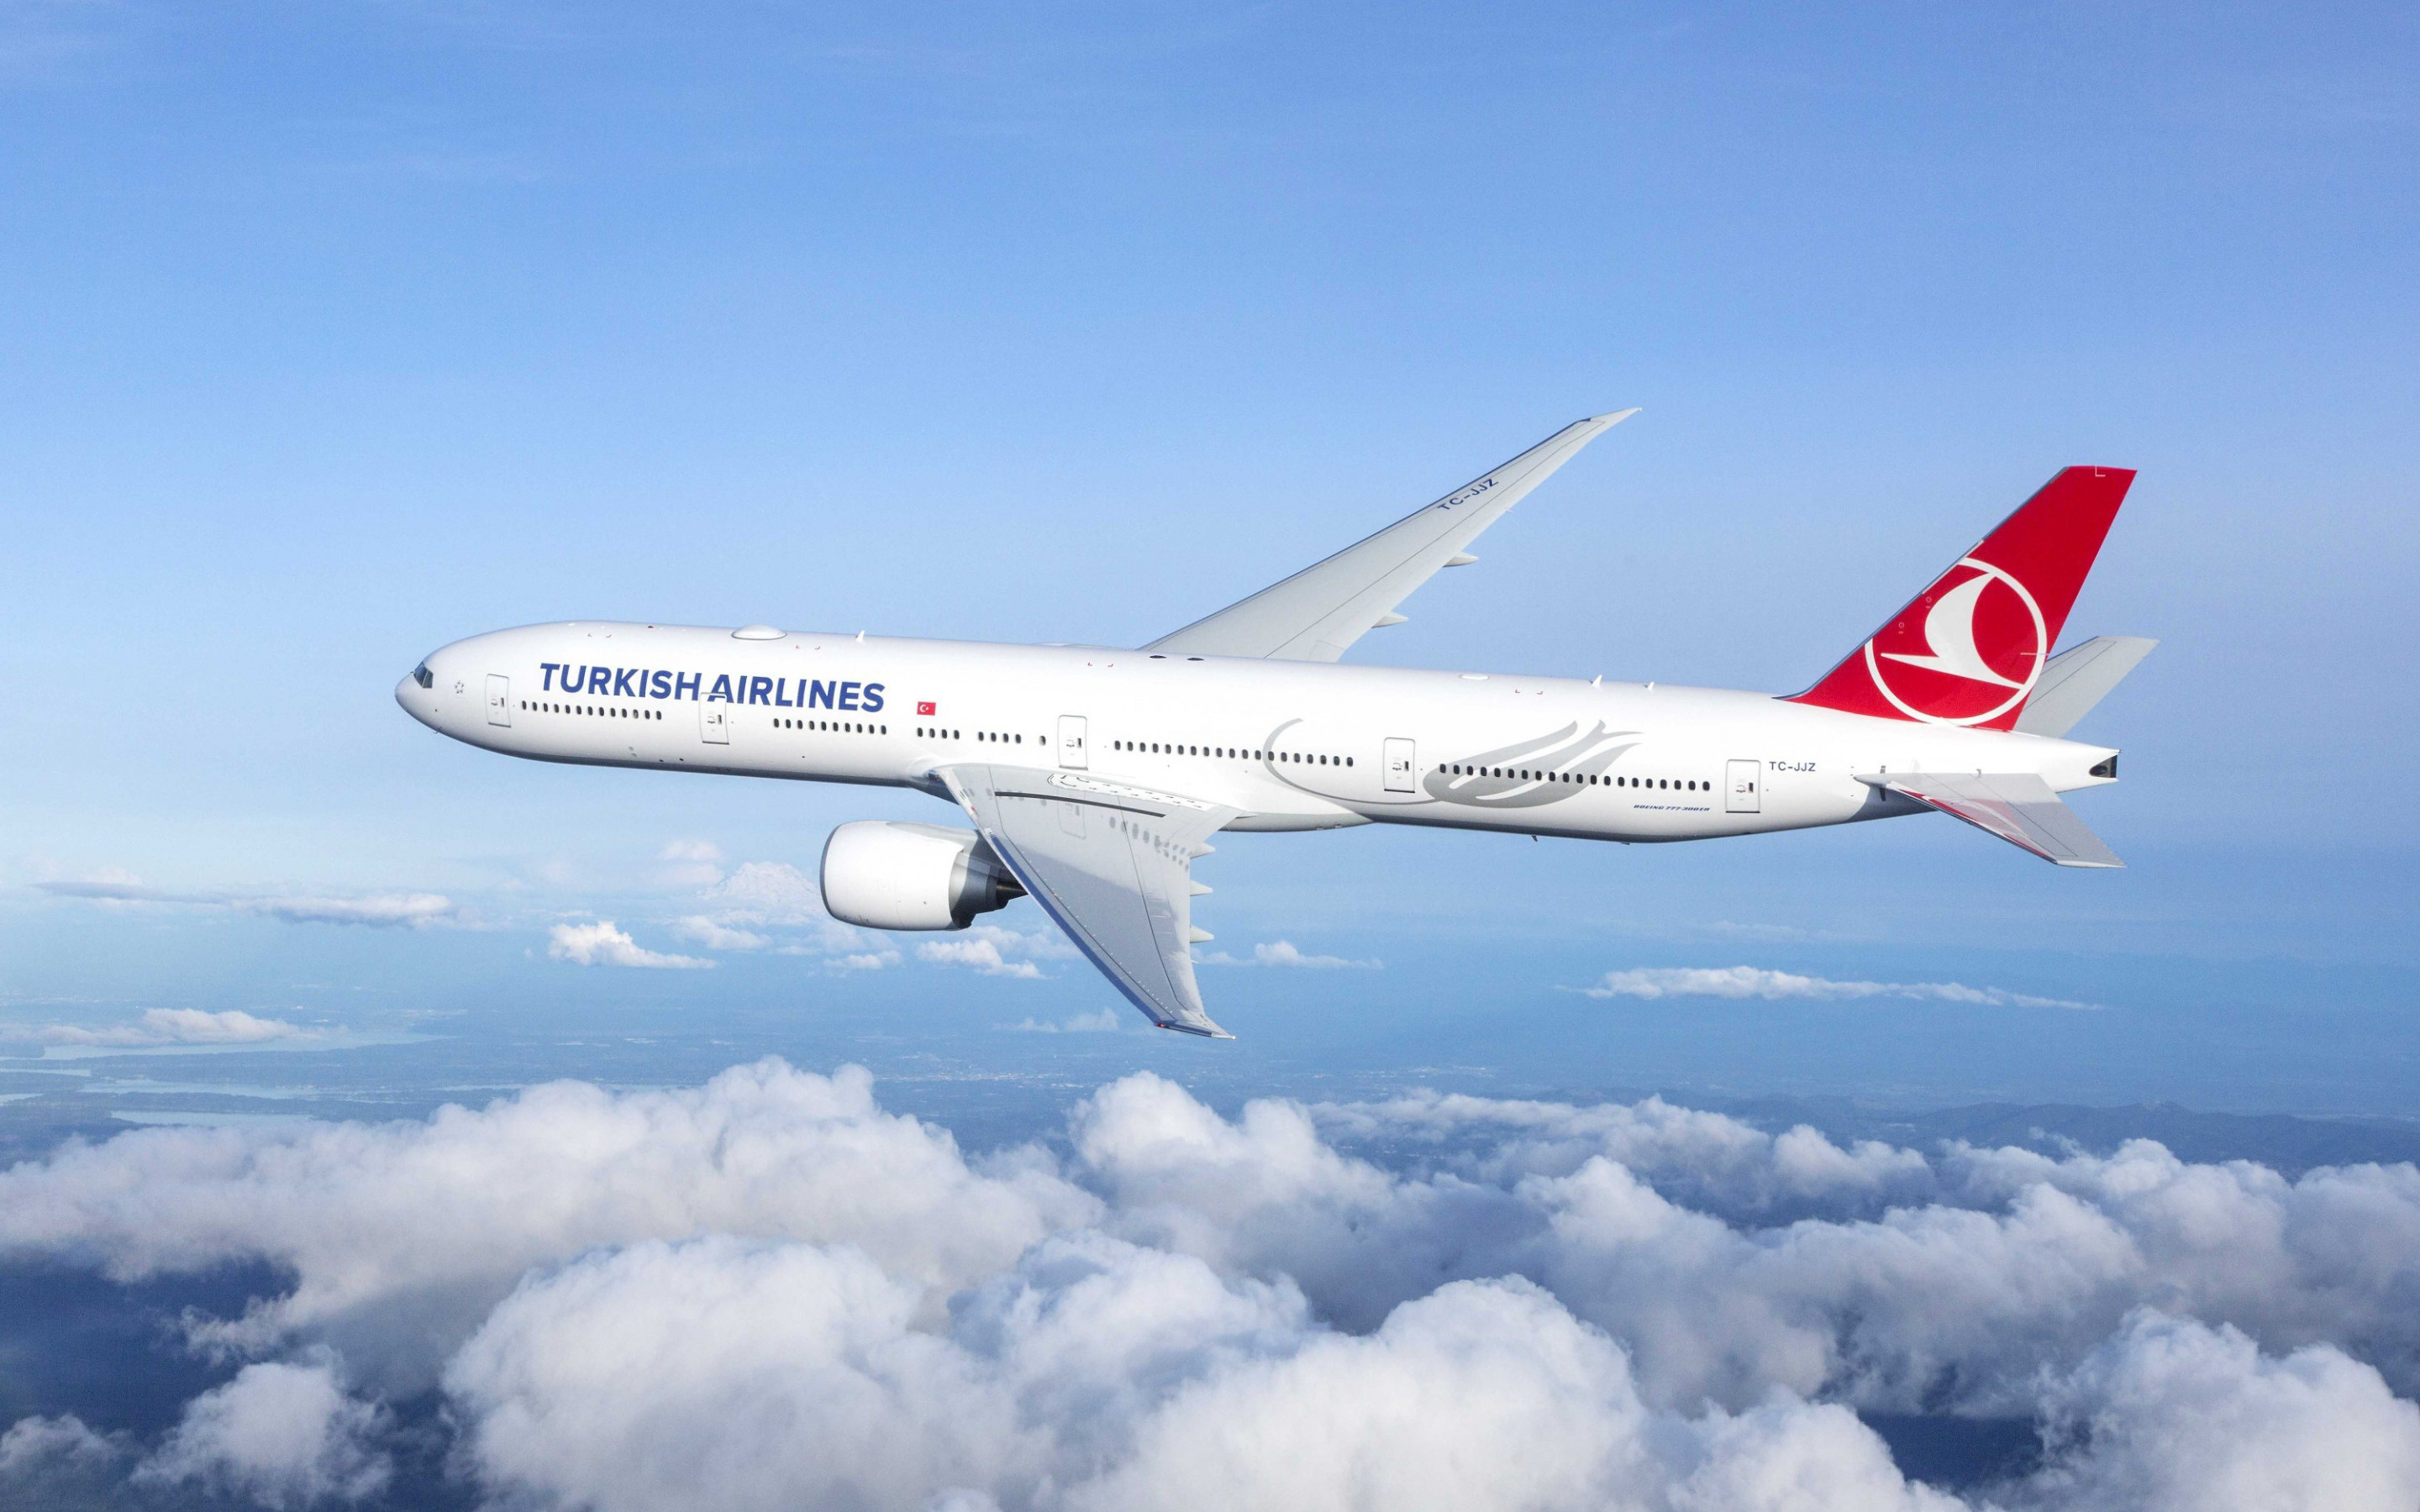 Boeing 777 wallpapers, Turkish Airlines plane, Travel to Turkey, HD pictures, 2880x1800 HD Desktop